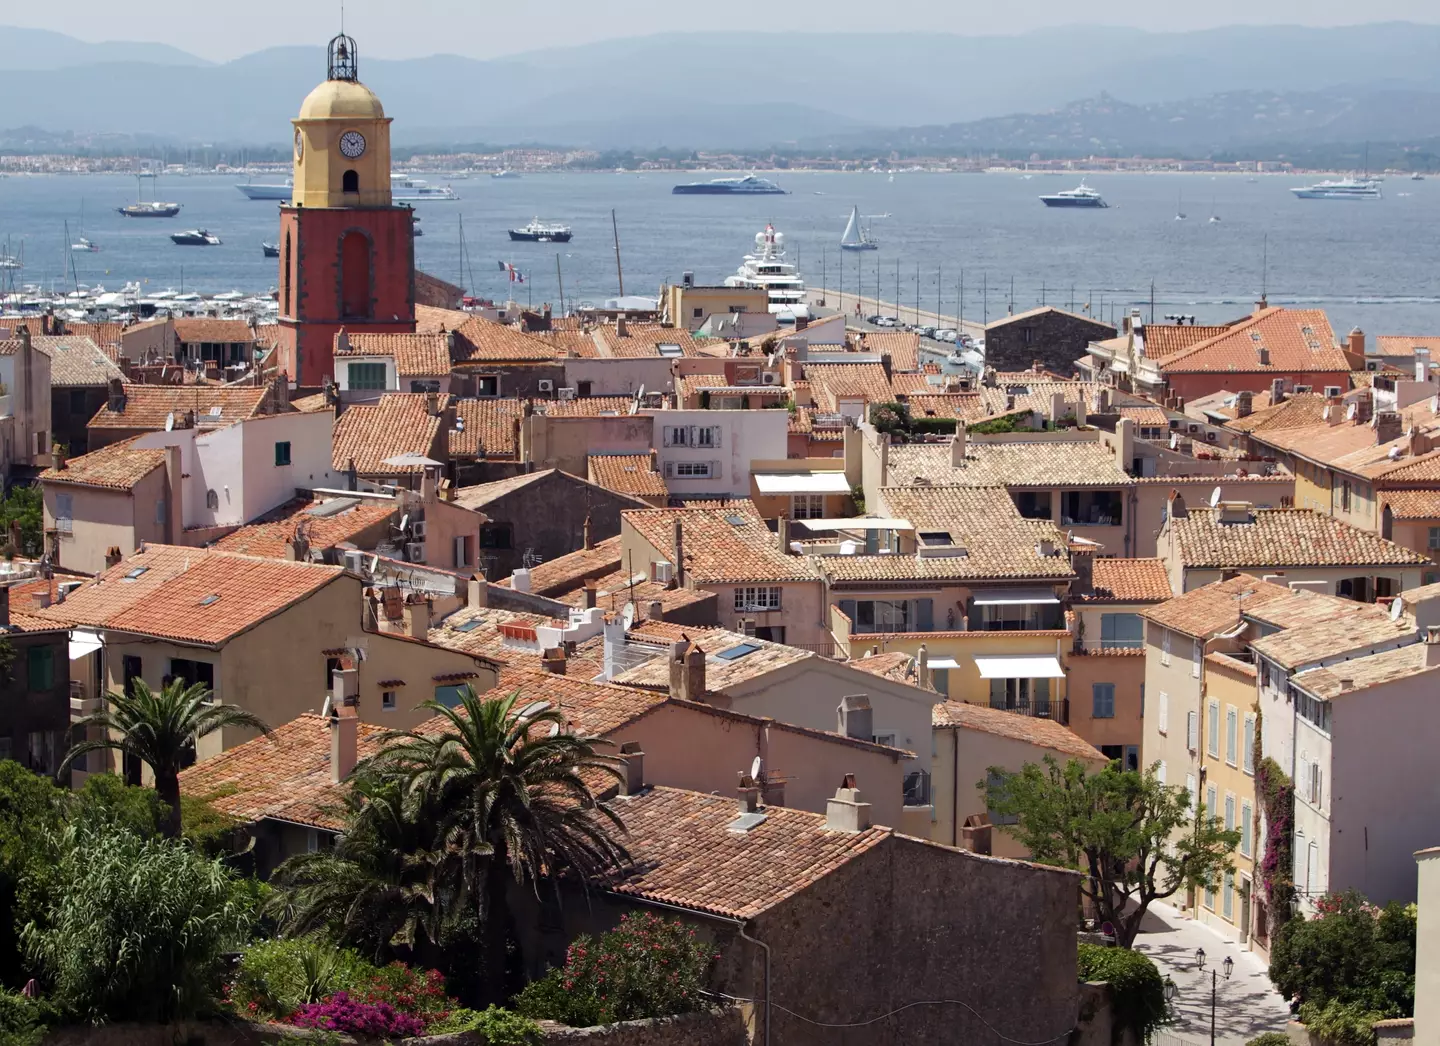 St. Tropez has become a popular destination for the rich and famous over the years.